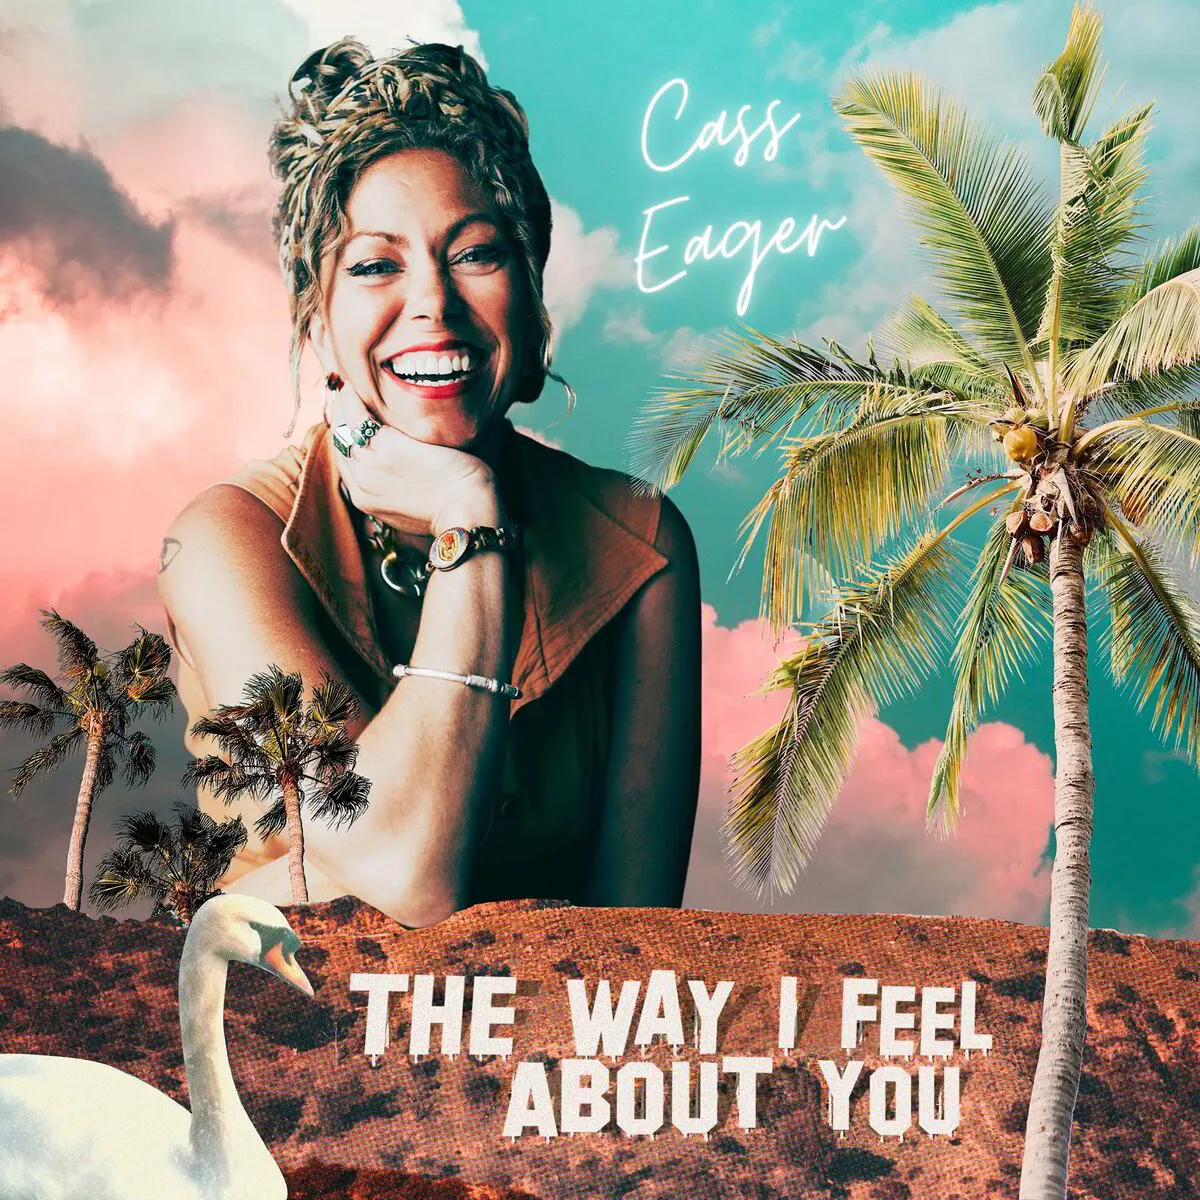 Cass Eager - The Way I Feel About You